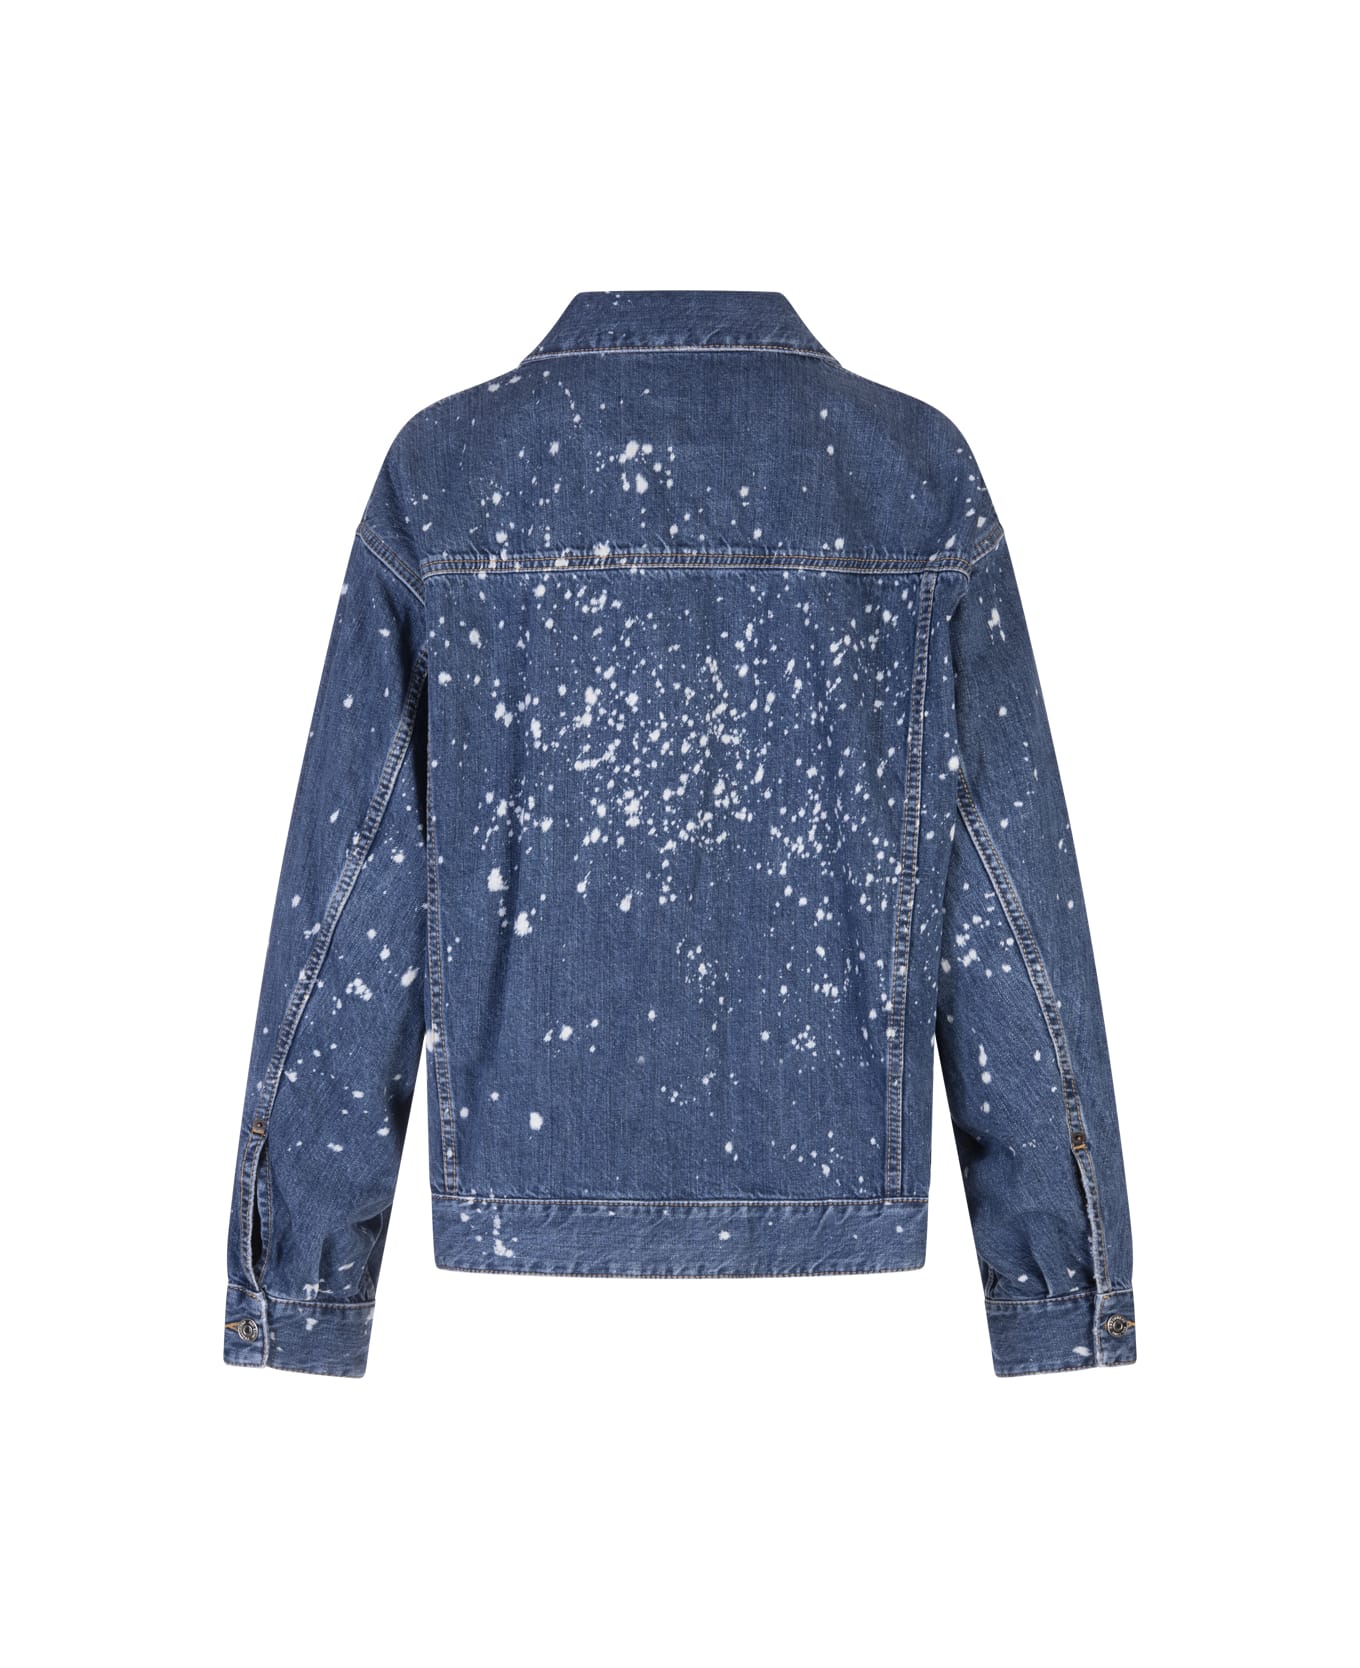 Dsquared2 Blue Denim Jacket With Colour Stains - Blu